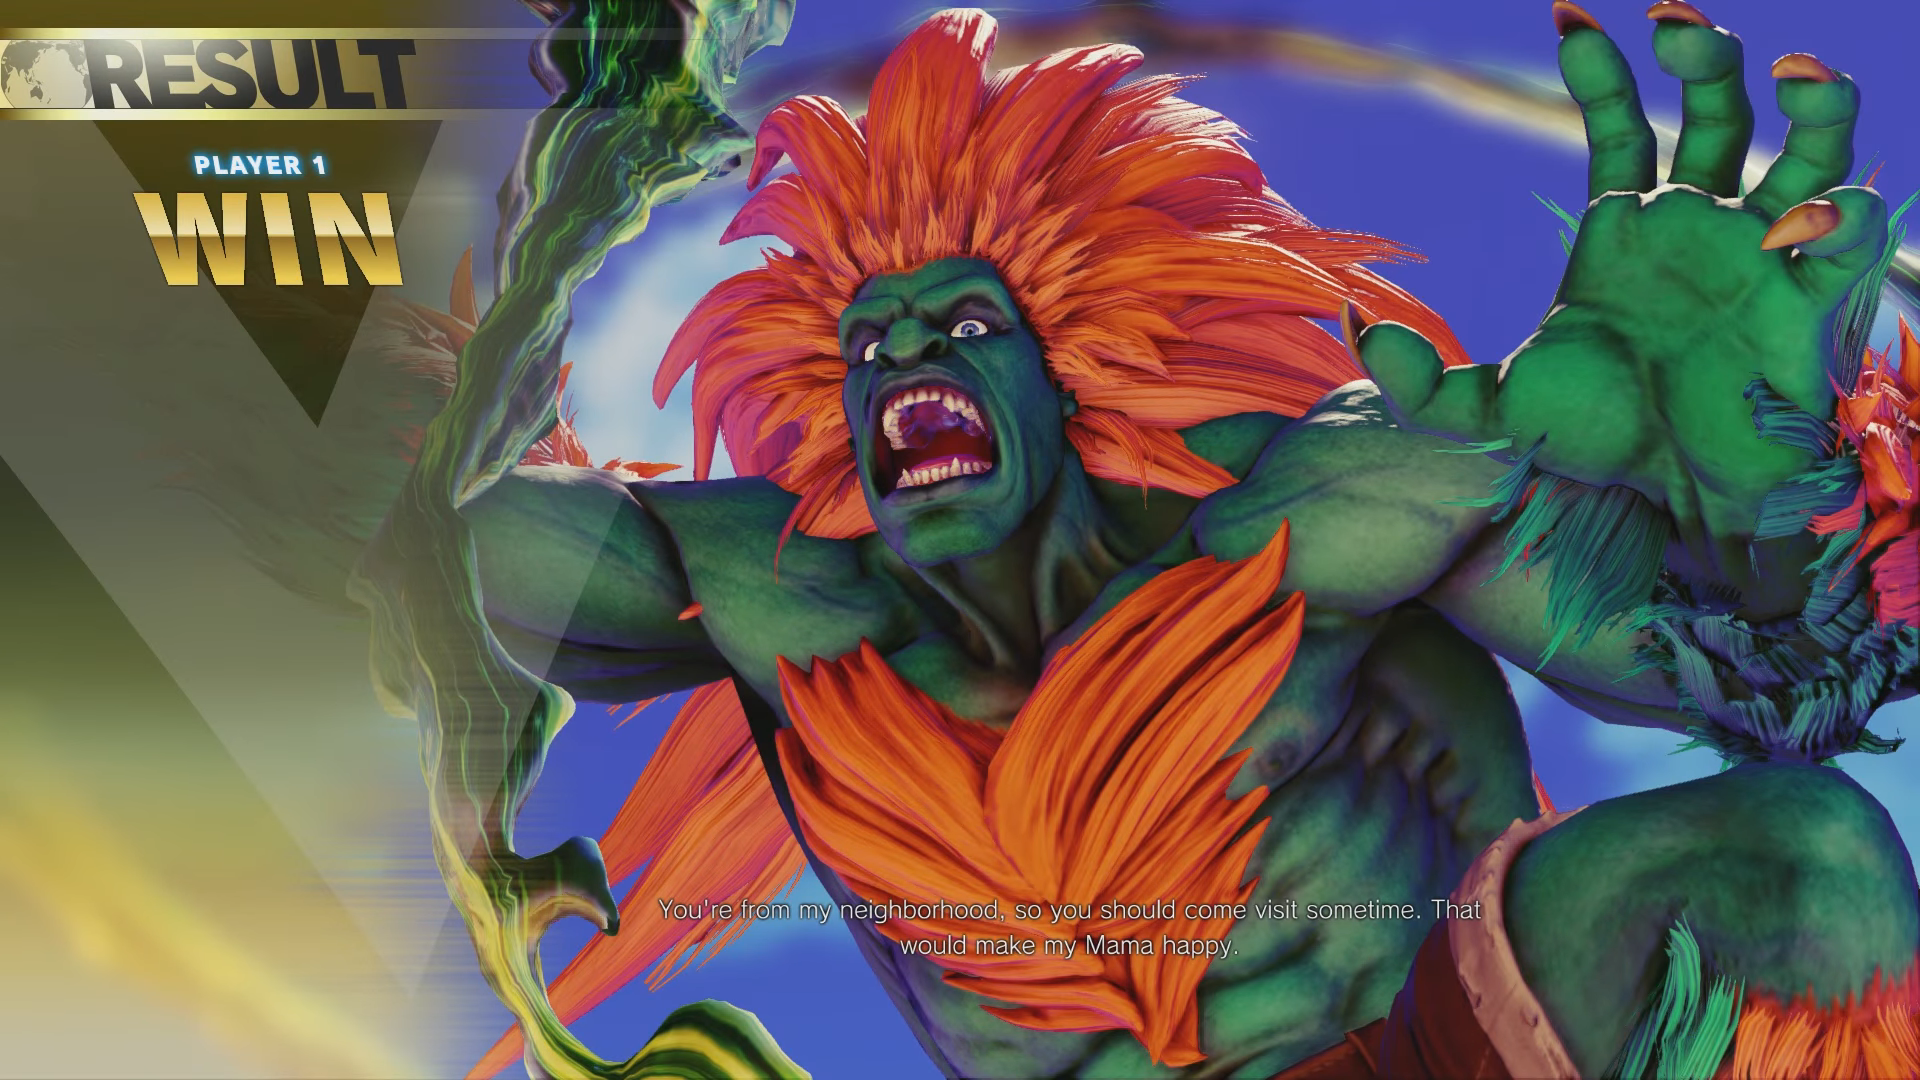 Blanka's Street Fighter V: Arcade Edition Character Intro suggests